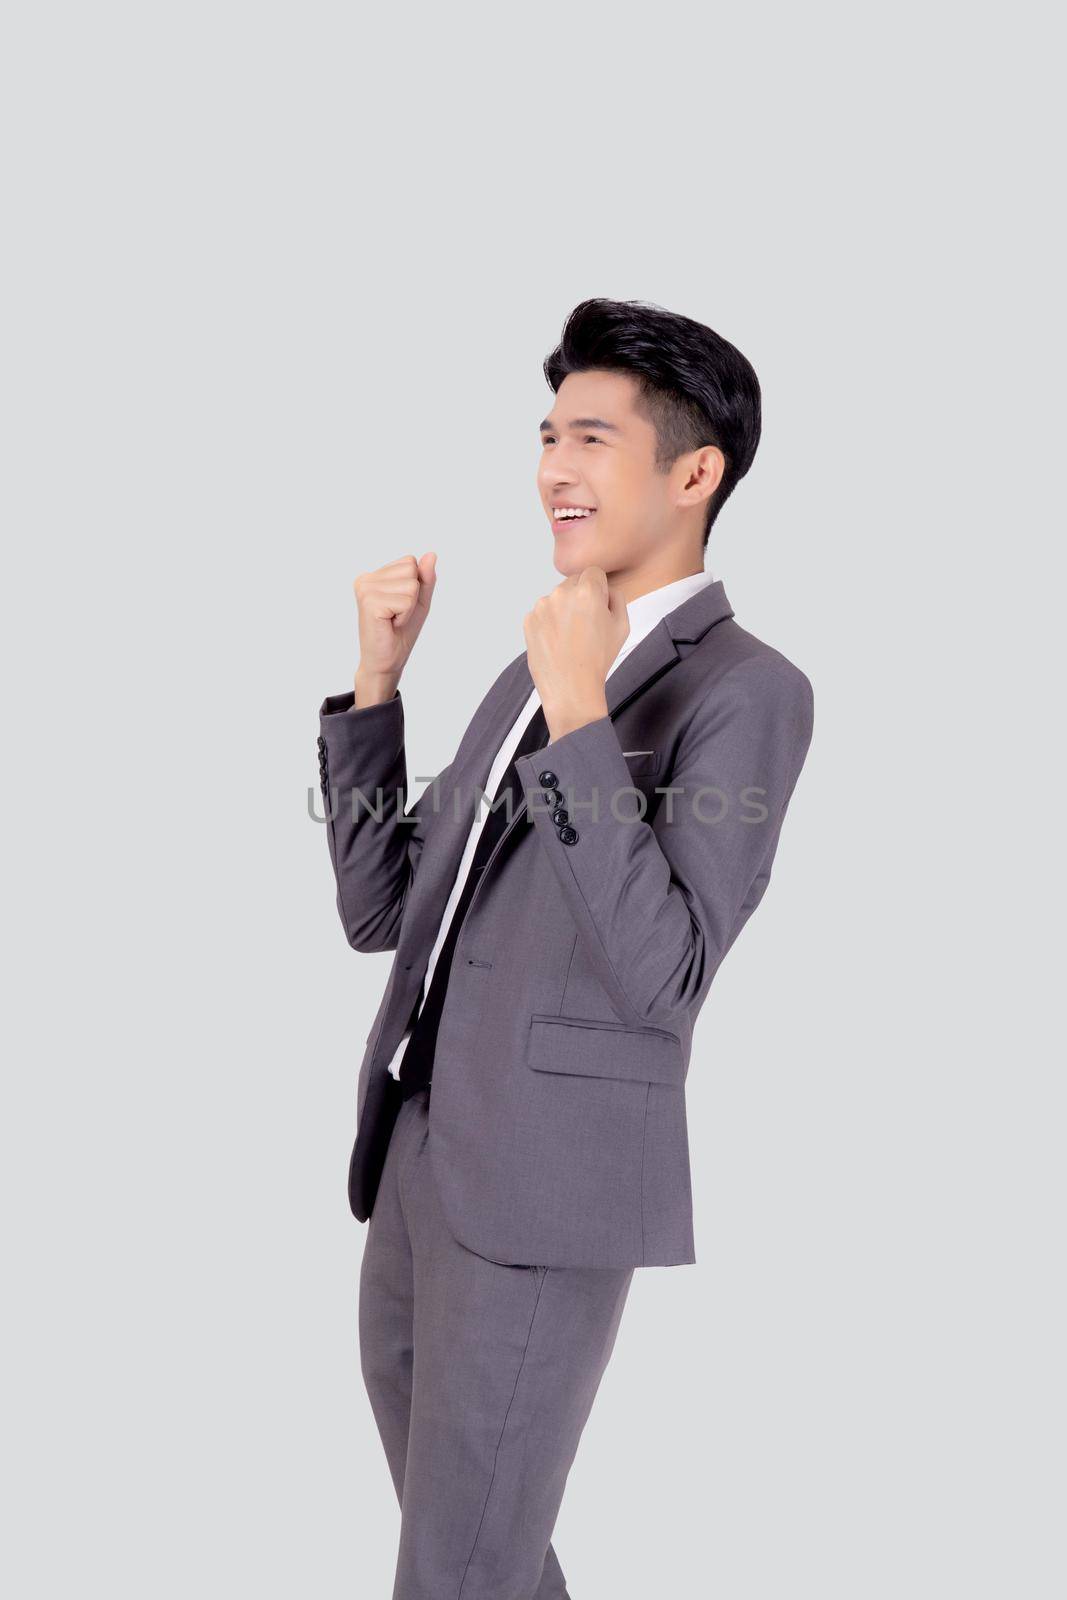 Portrait businessman in suit standing with win success isolated on white background, young asian business man is manager or executive having confident and excited is positive, expression and emotion.